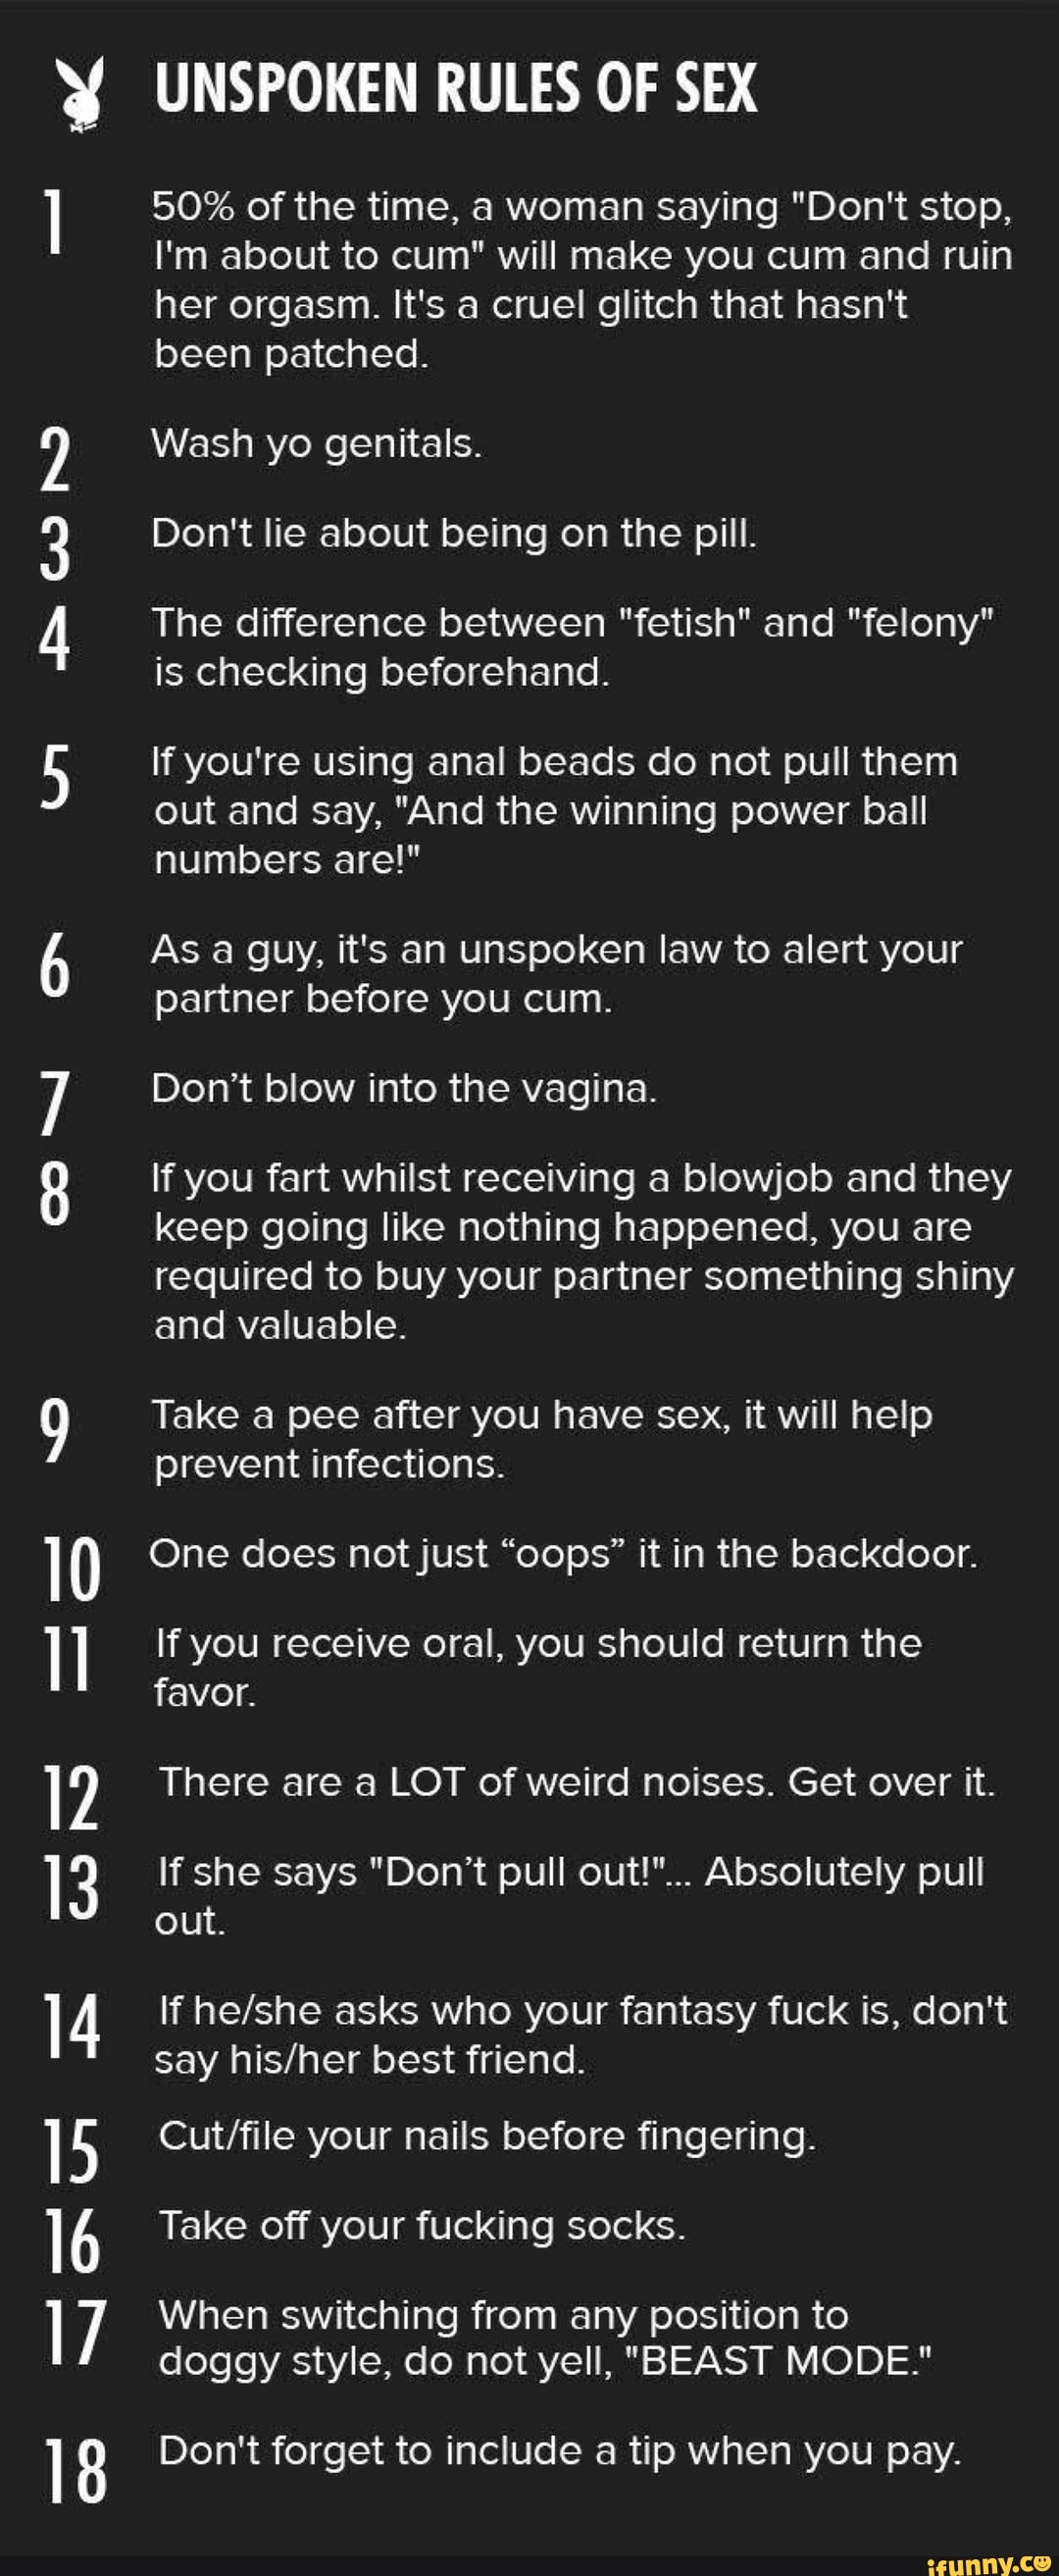 10 2 13 14 18 UNSPOKEN RULES OF SEX 50% of the time, a woman